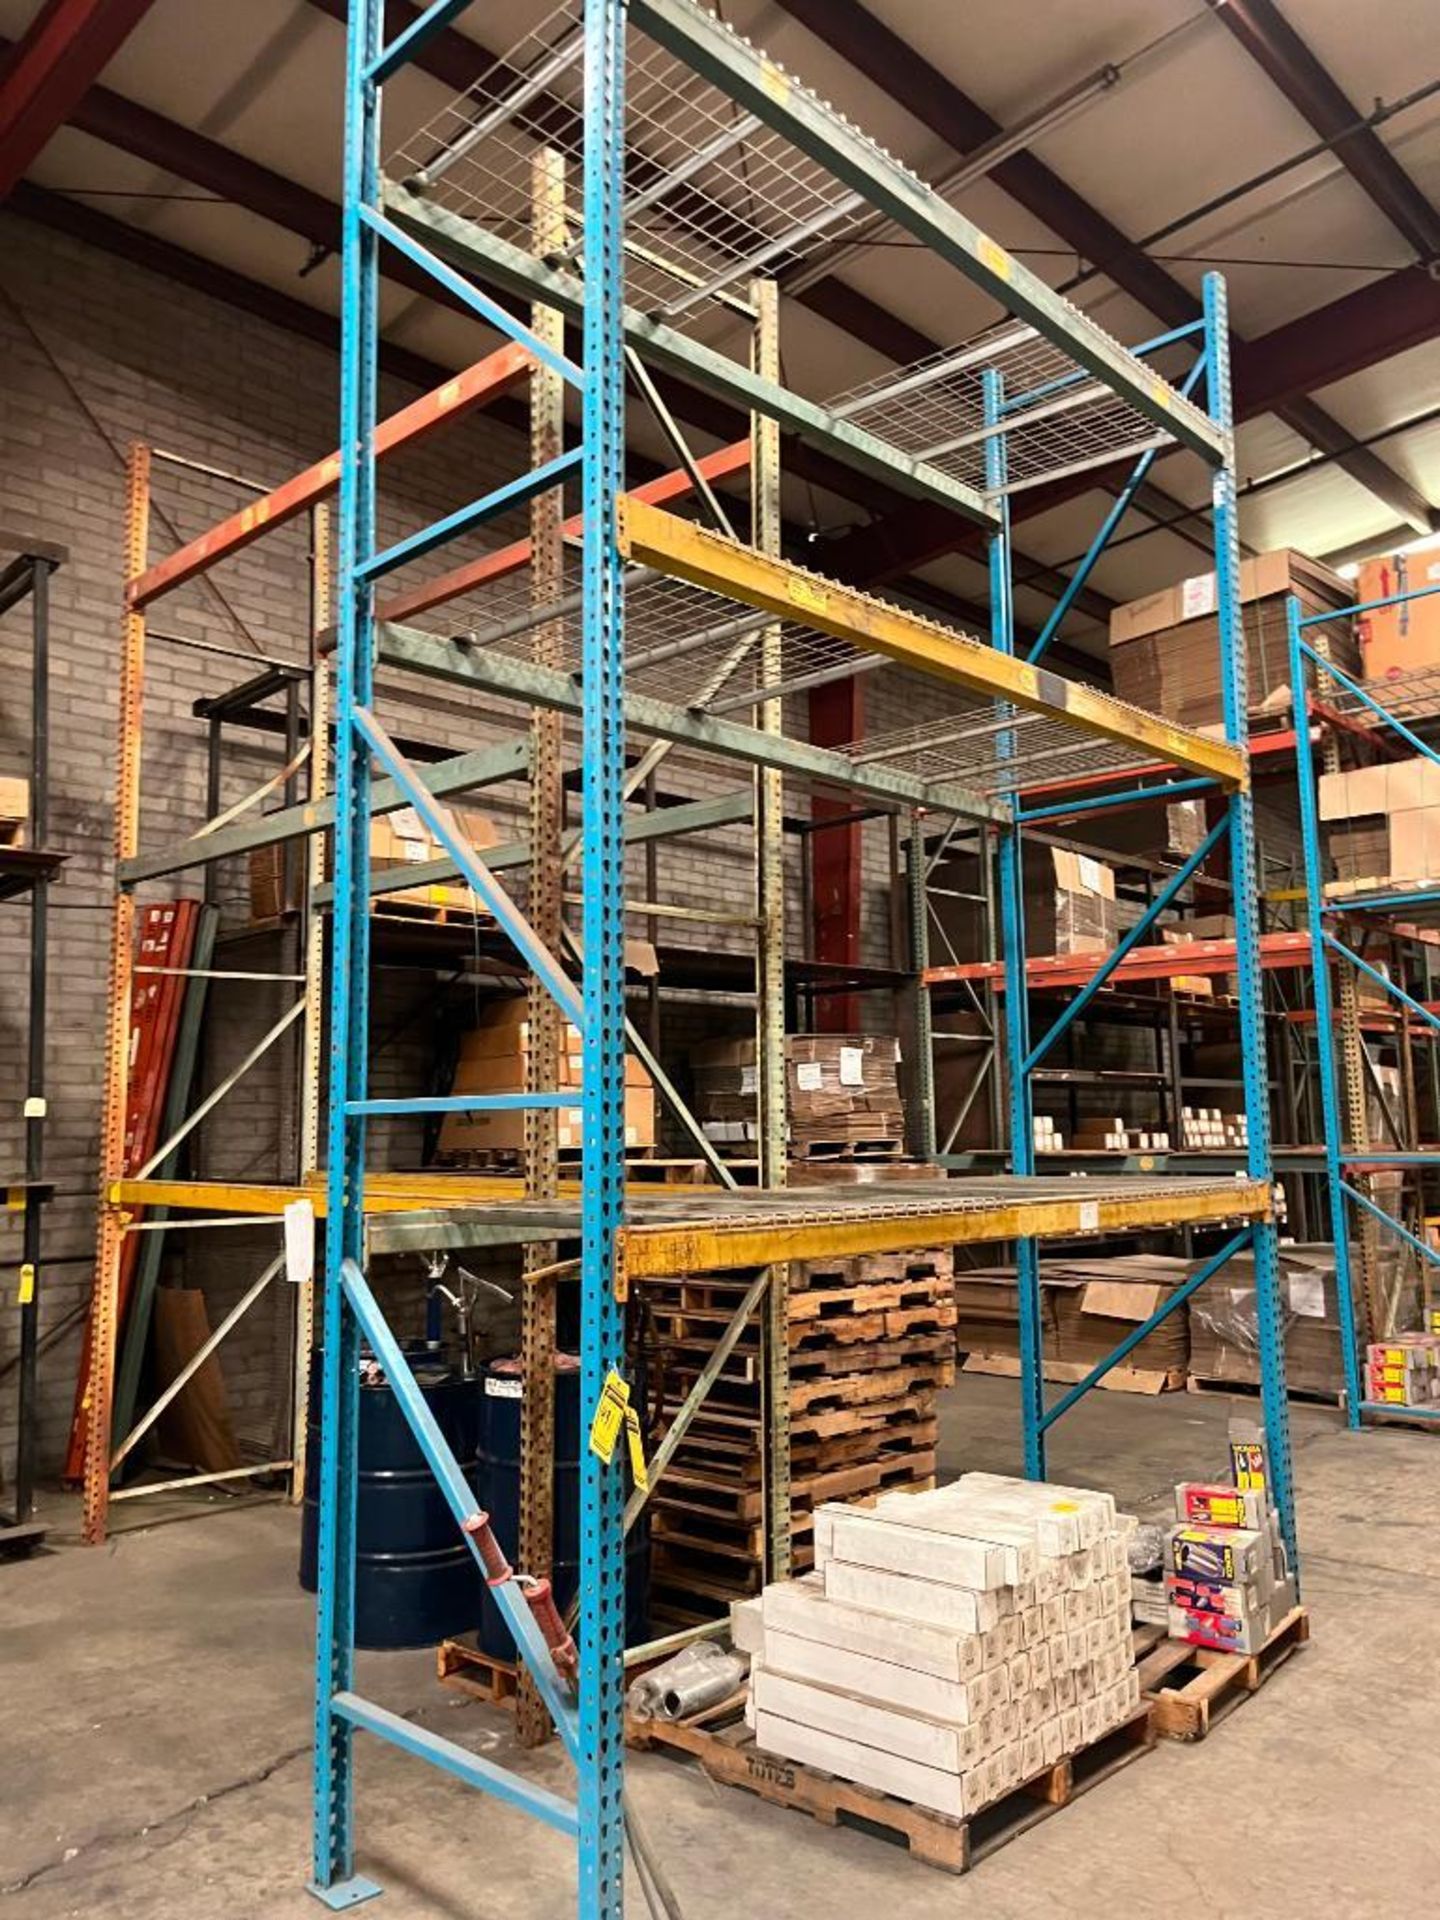 (10x) Sections of Teardrop Style Pallet Racking, (18) 16' x 42" Uprights, (56) 4" x 124" Cross Beams